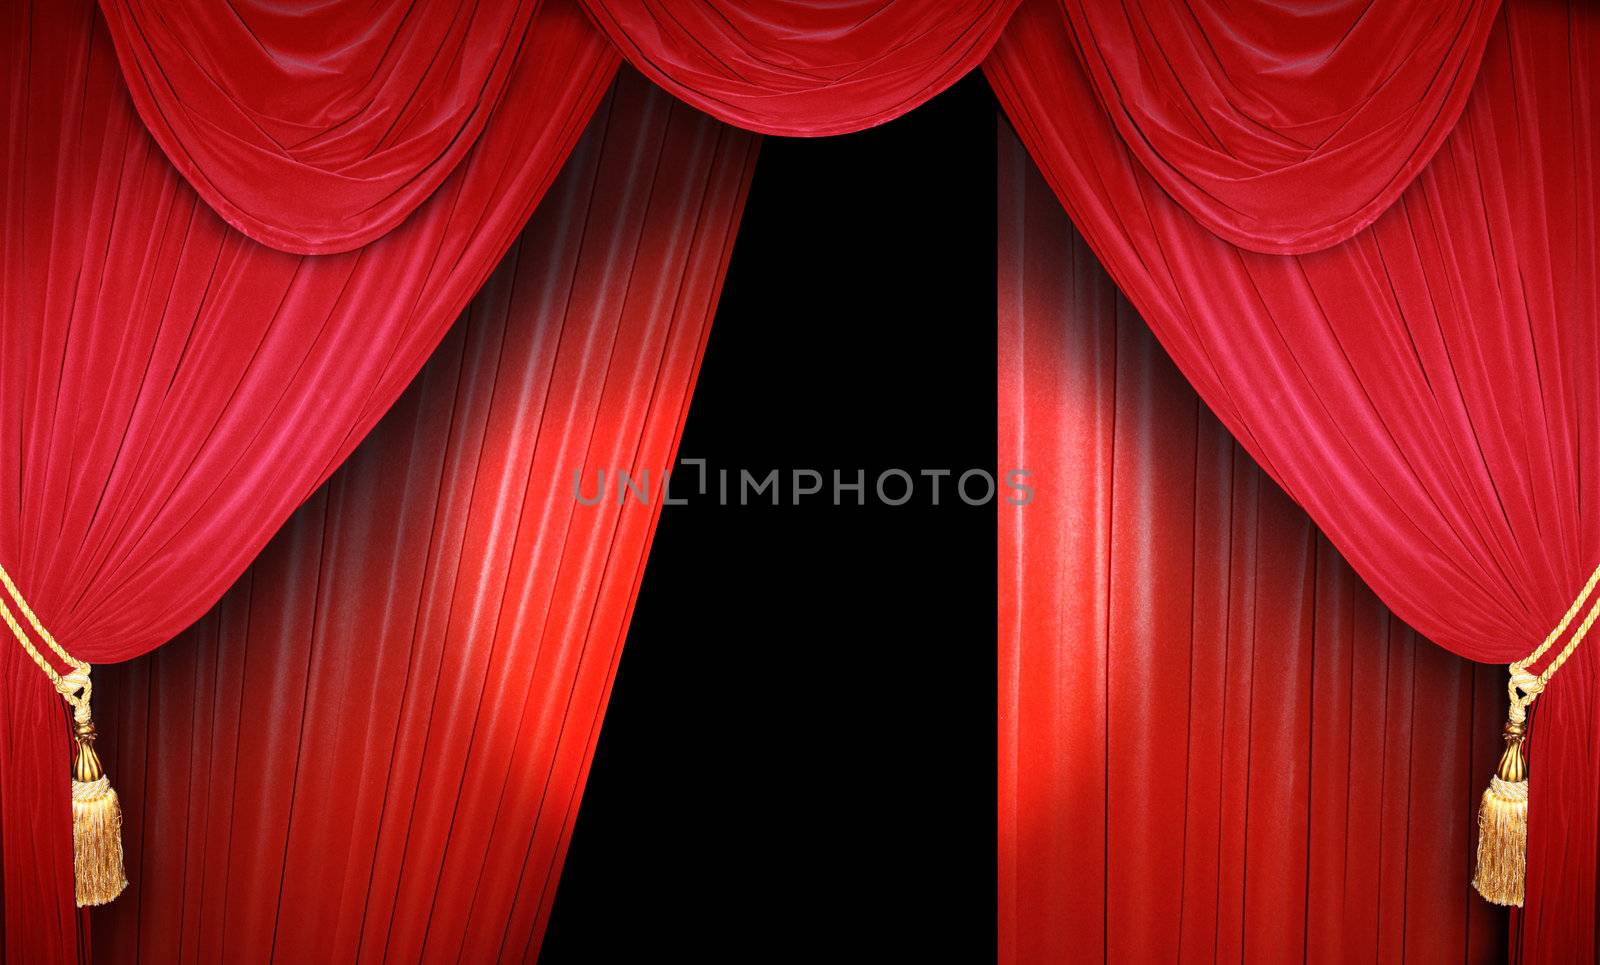 Show on stage by photochecker